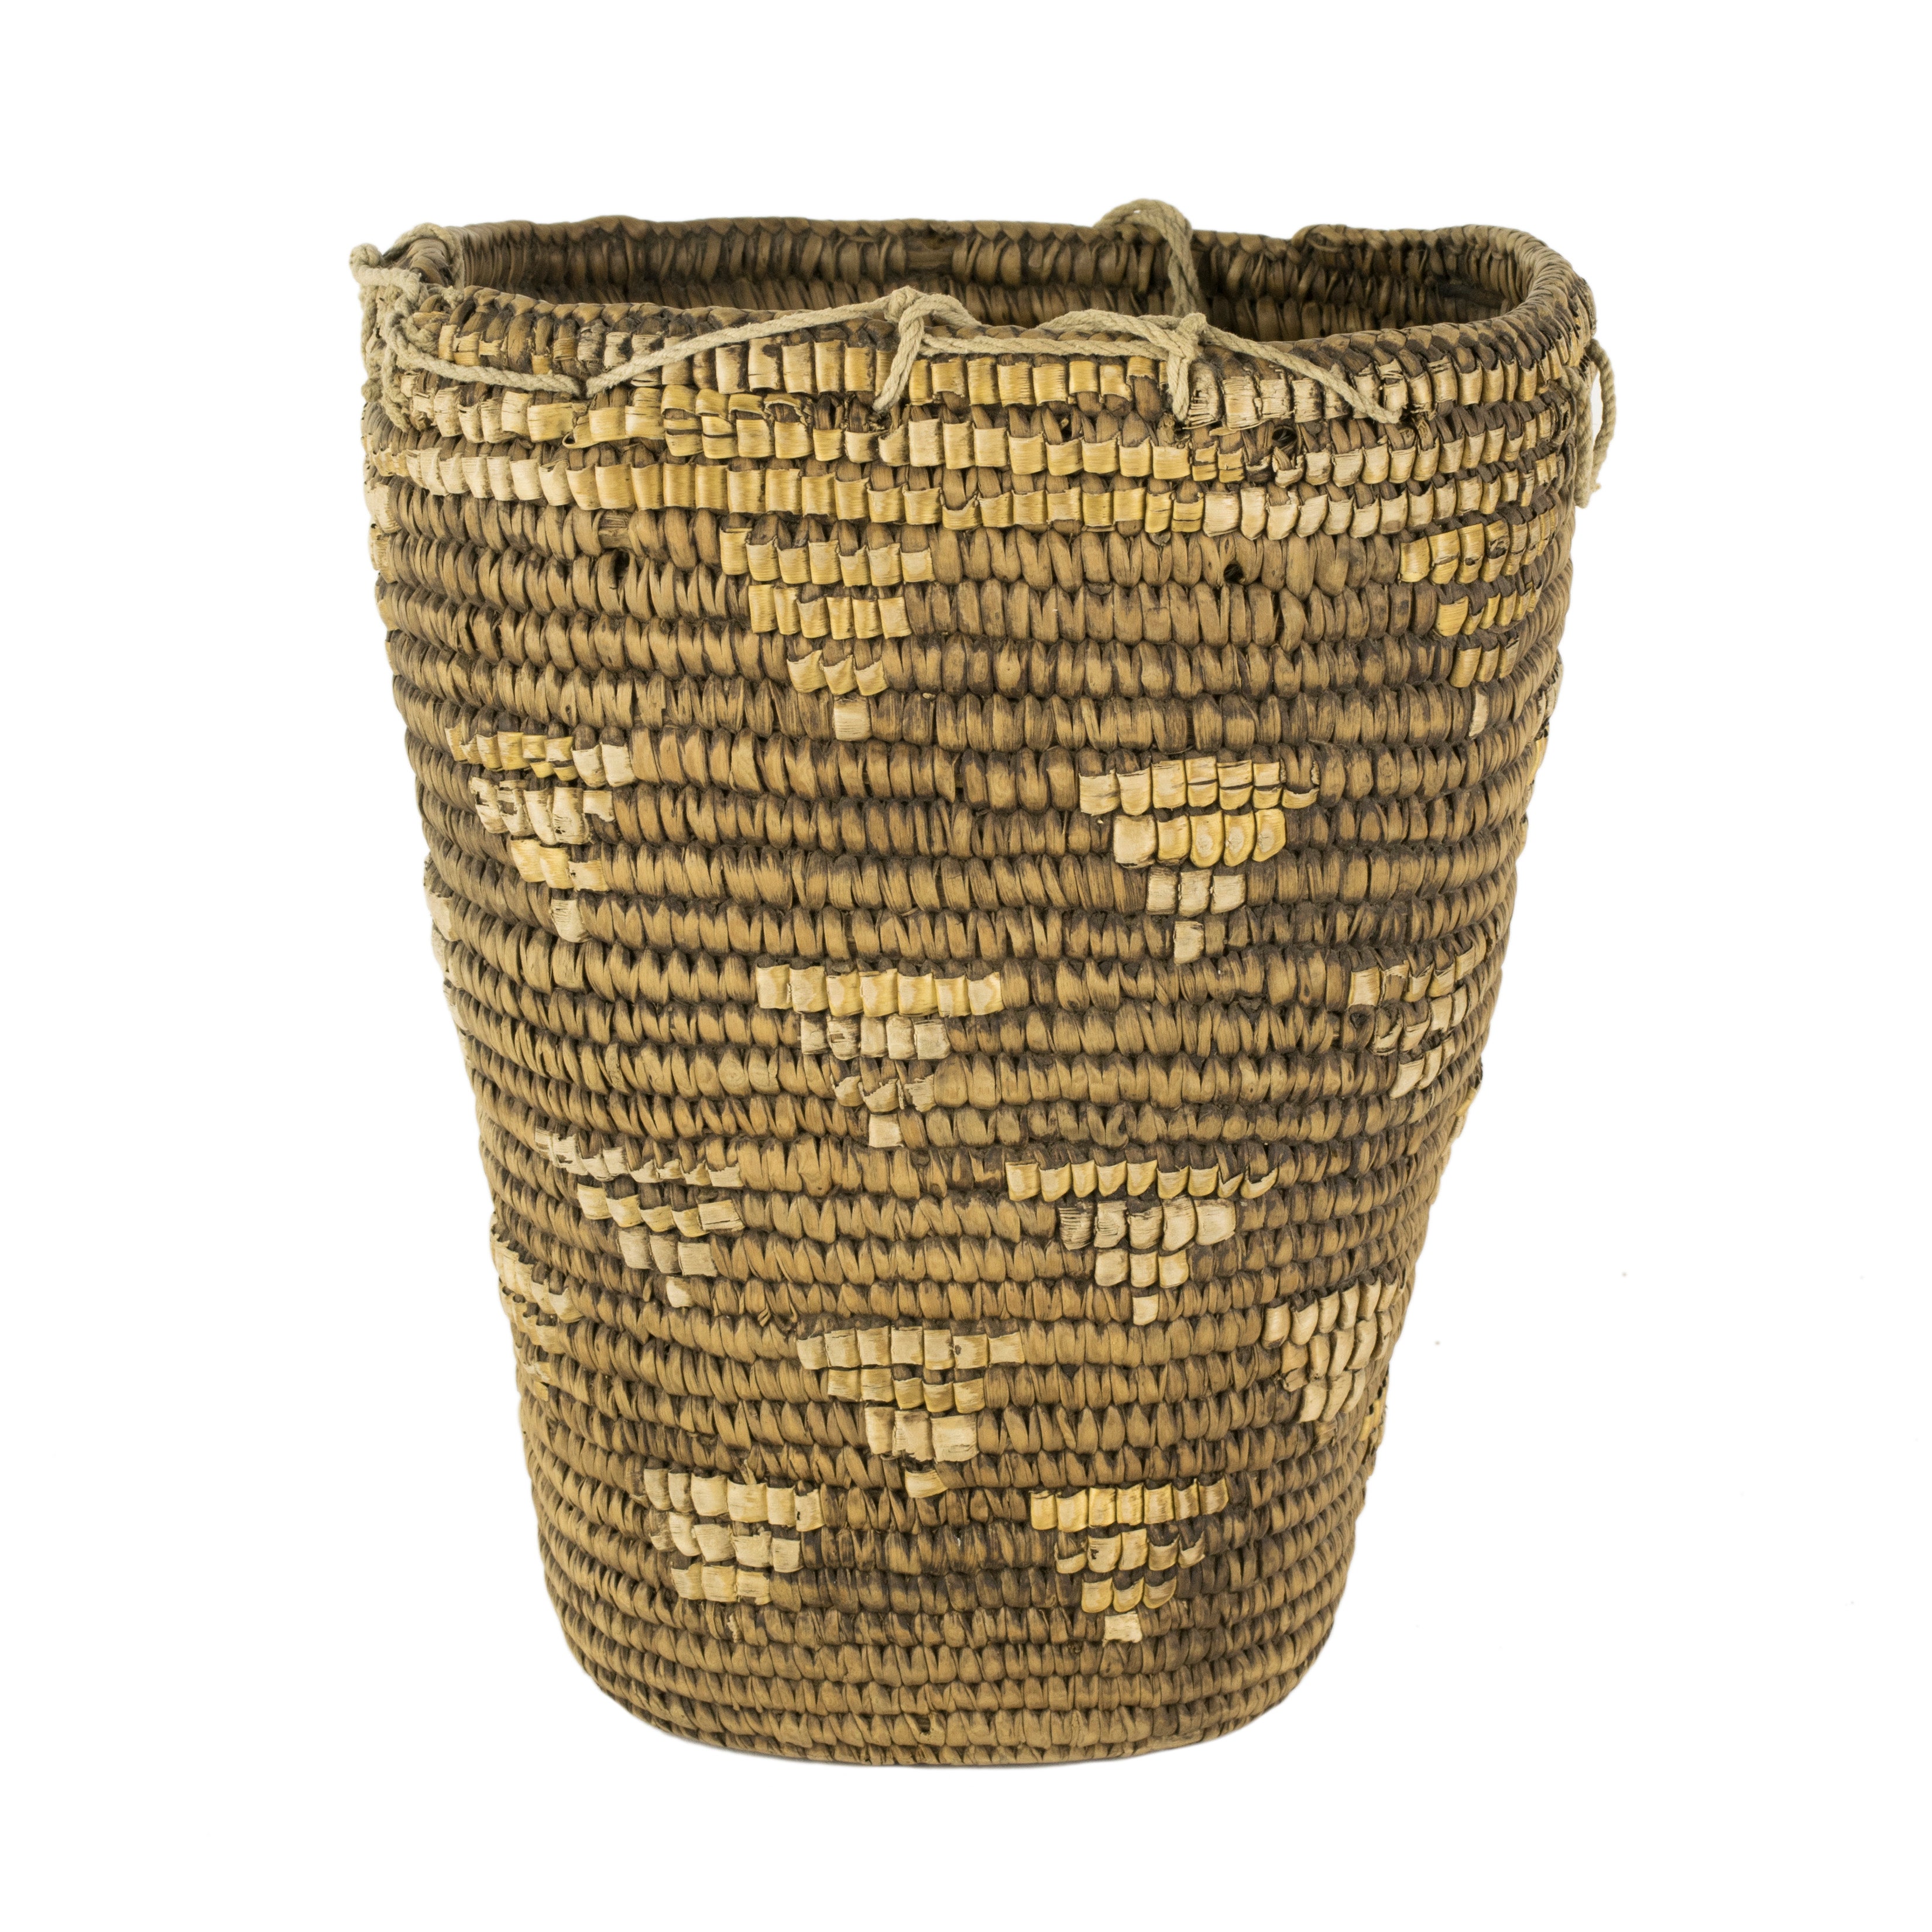 Partially Imbricated Klickitat Berry Basket, Native, Basketry, Vertical